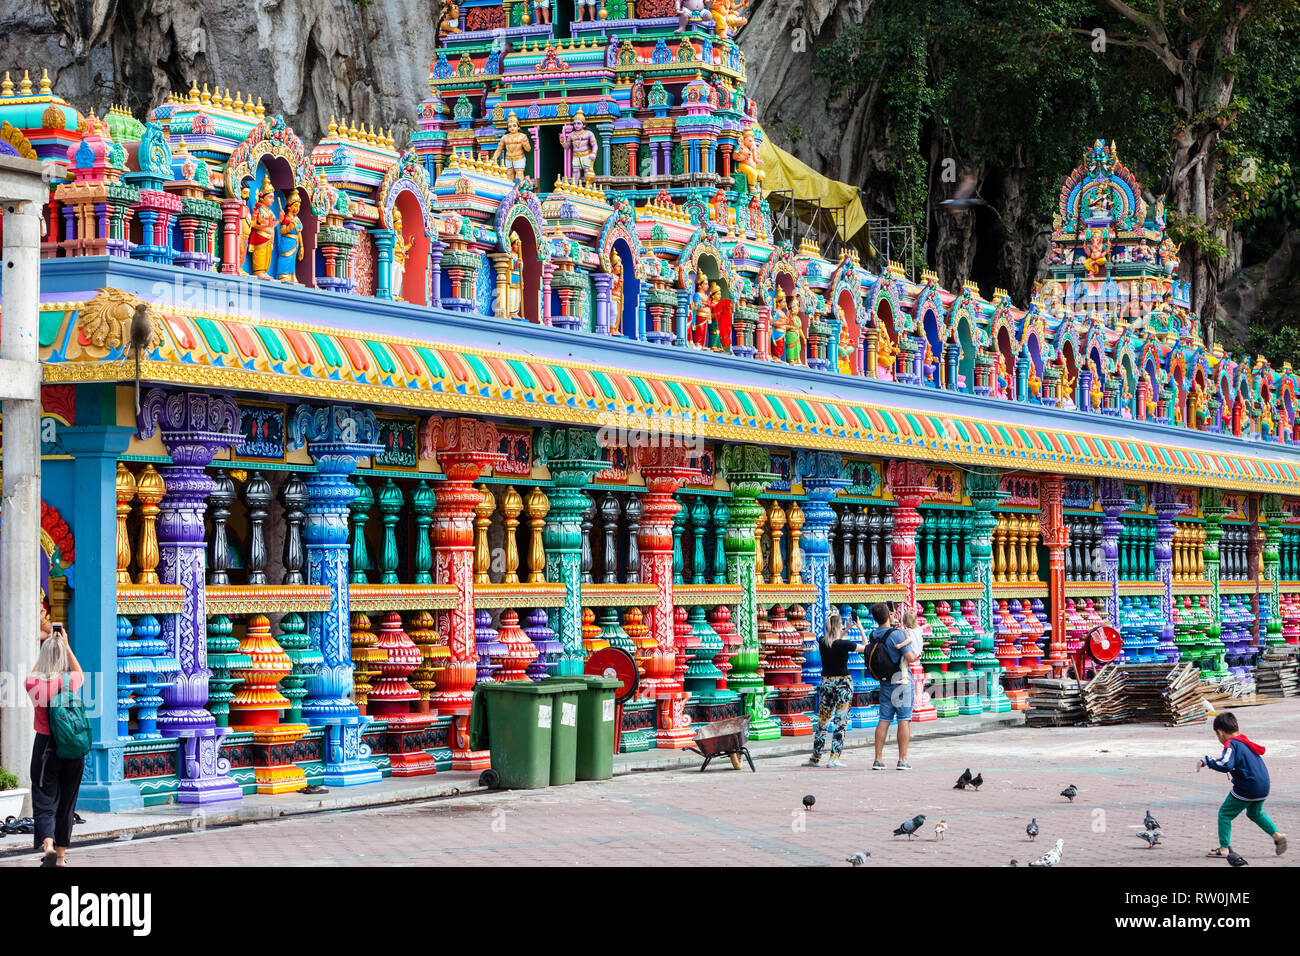 Batu Caves, Hindu Temple at Base of Stairs Leading to Caves, Selangor, Malaysia. Stock Photo